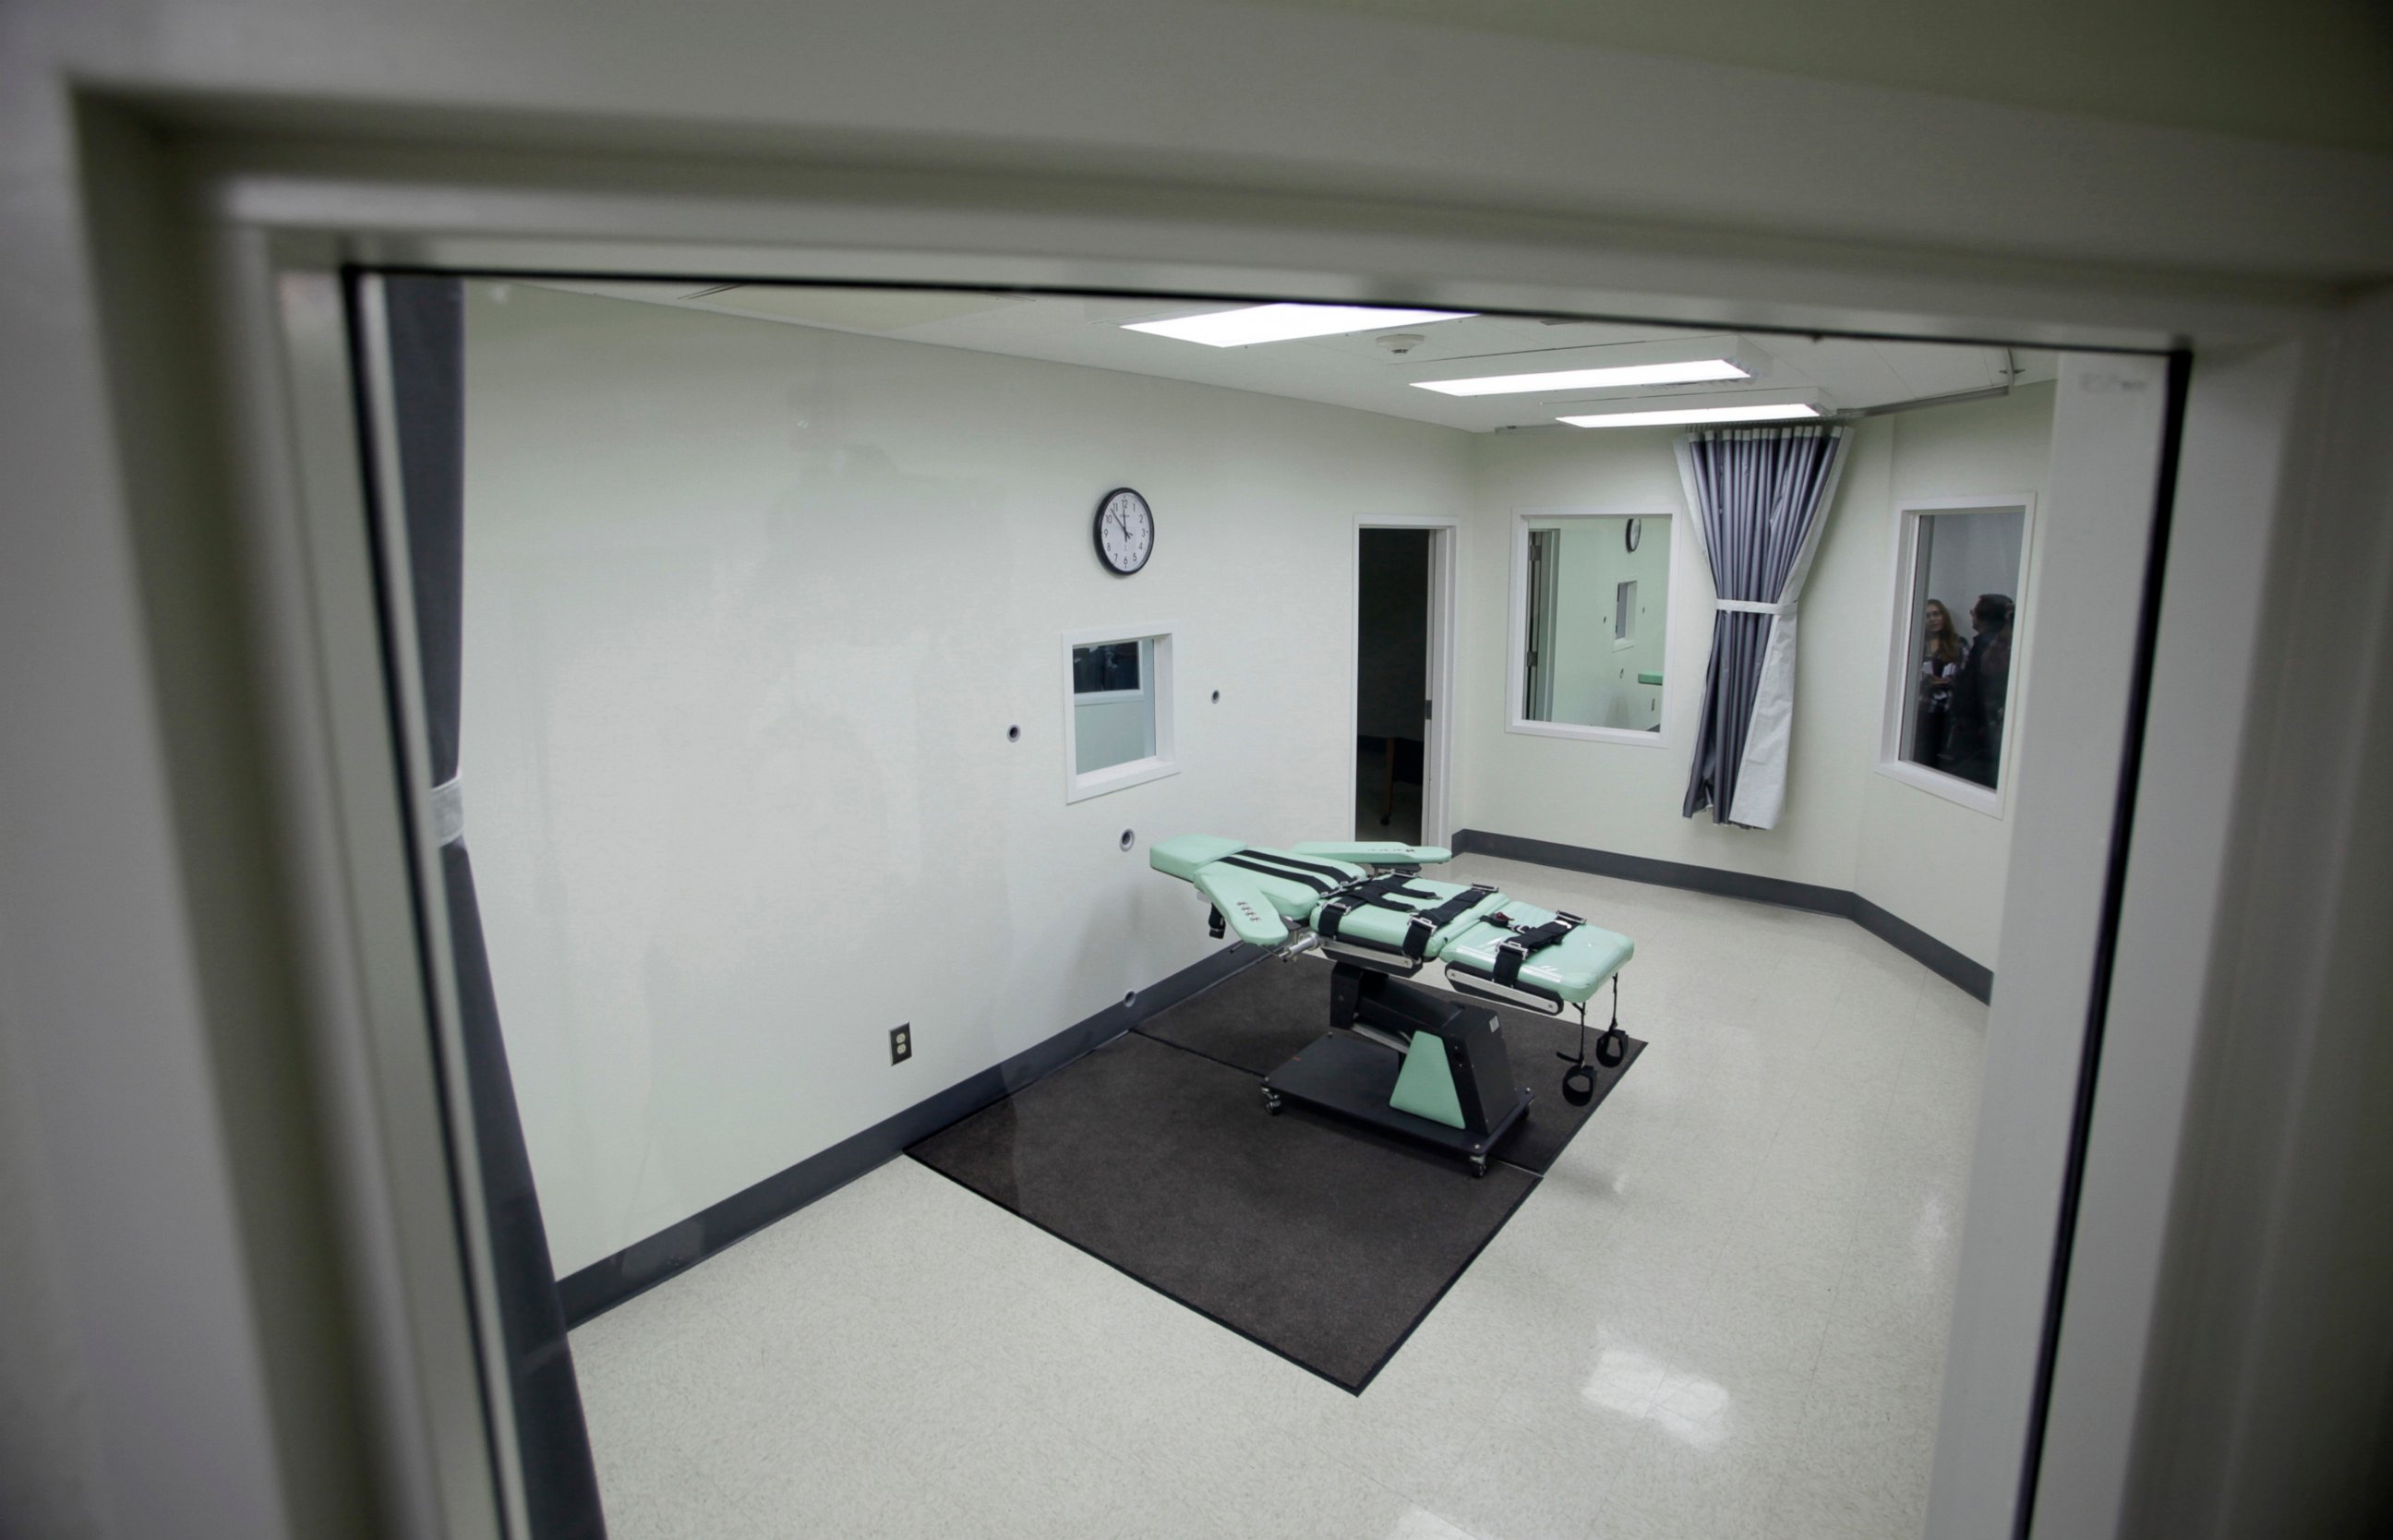 This Sept. 21, 2010, file photo shows the interior of the lethal injection facility at San Quentin State Prison in San Quentin, Calif. Gov. Gavin Newsom is expected to sign a moratorium on the death penalty.